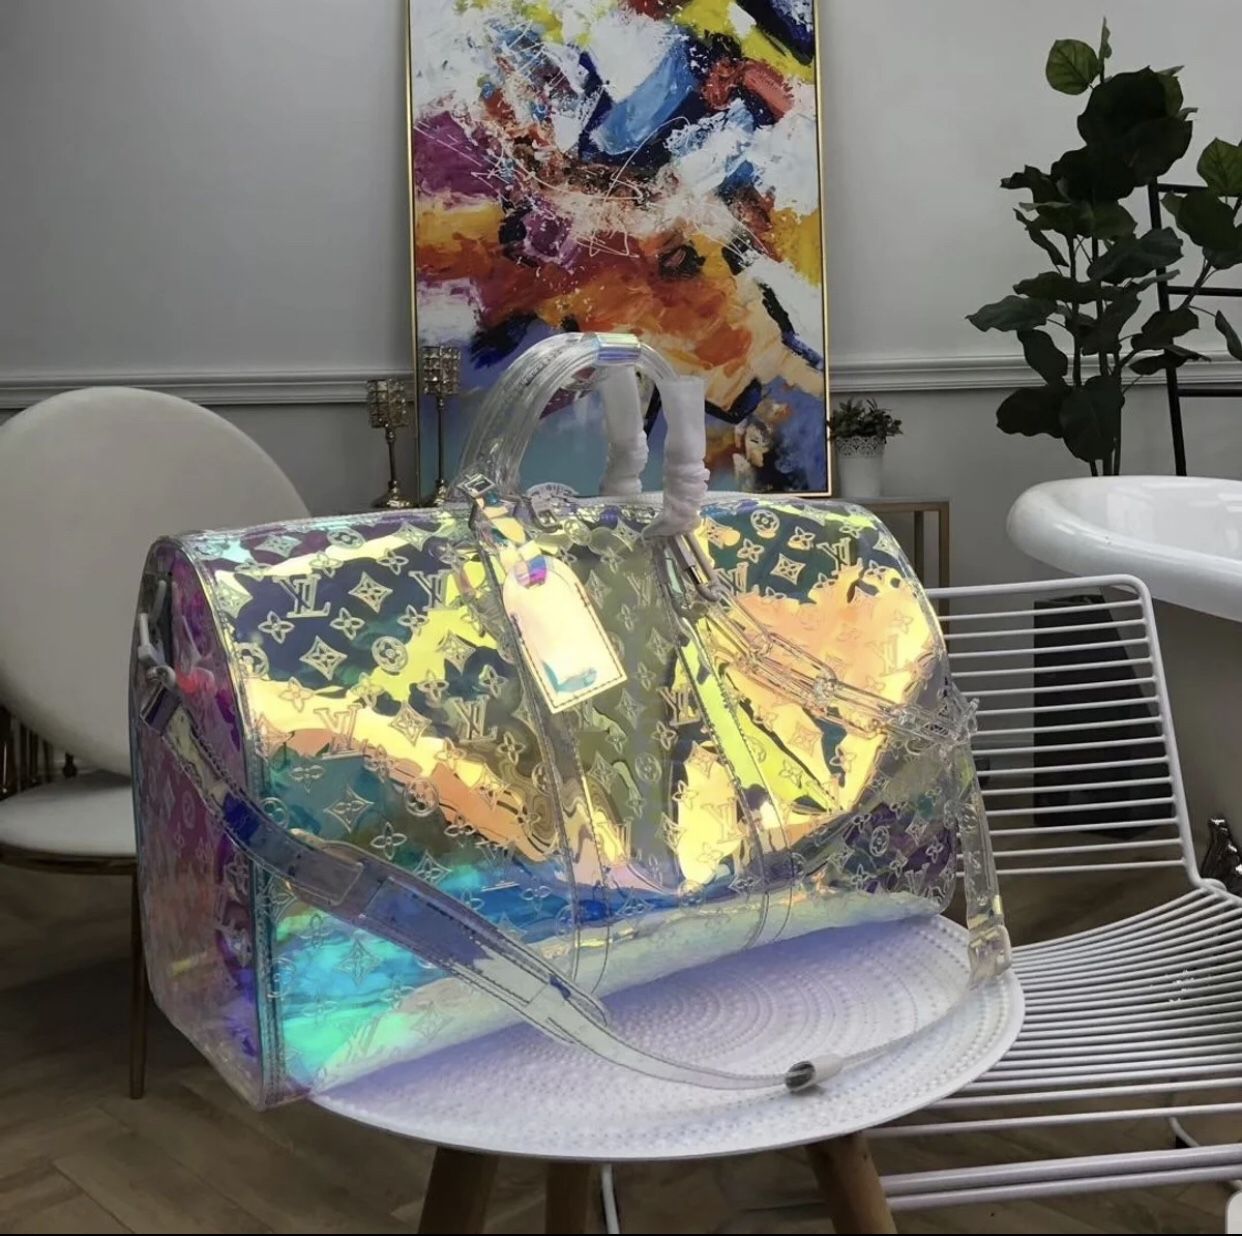 Louis Vuitton Keepall 50 Iridescent Prism Baggage